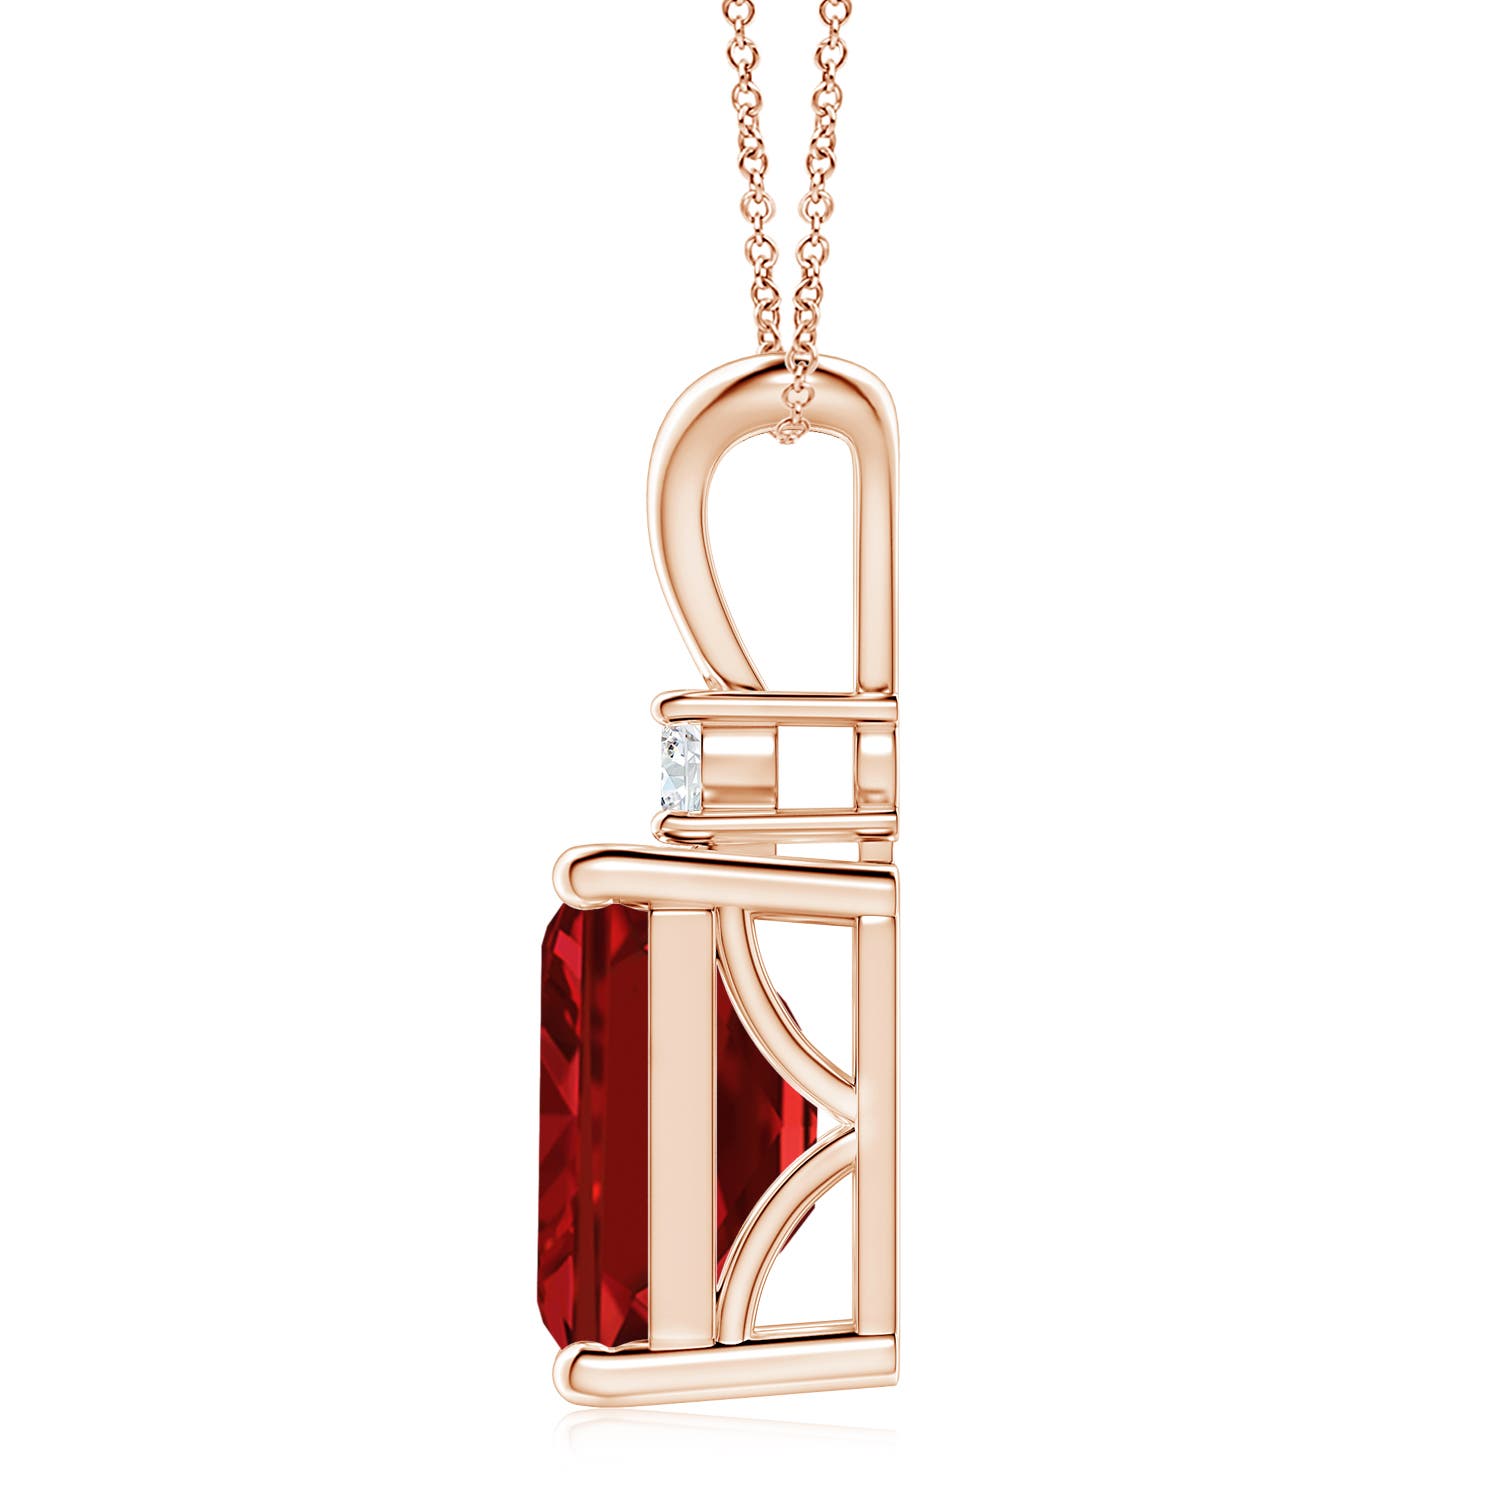 AAAA - Ruby / 6.41 CT / 14 KT Rose Gold